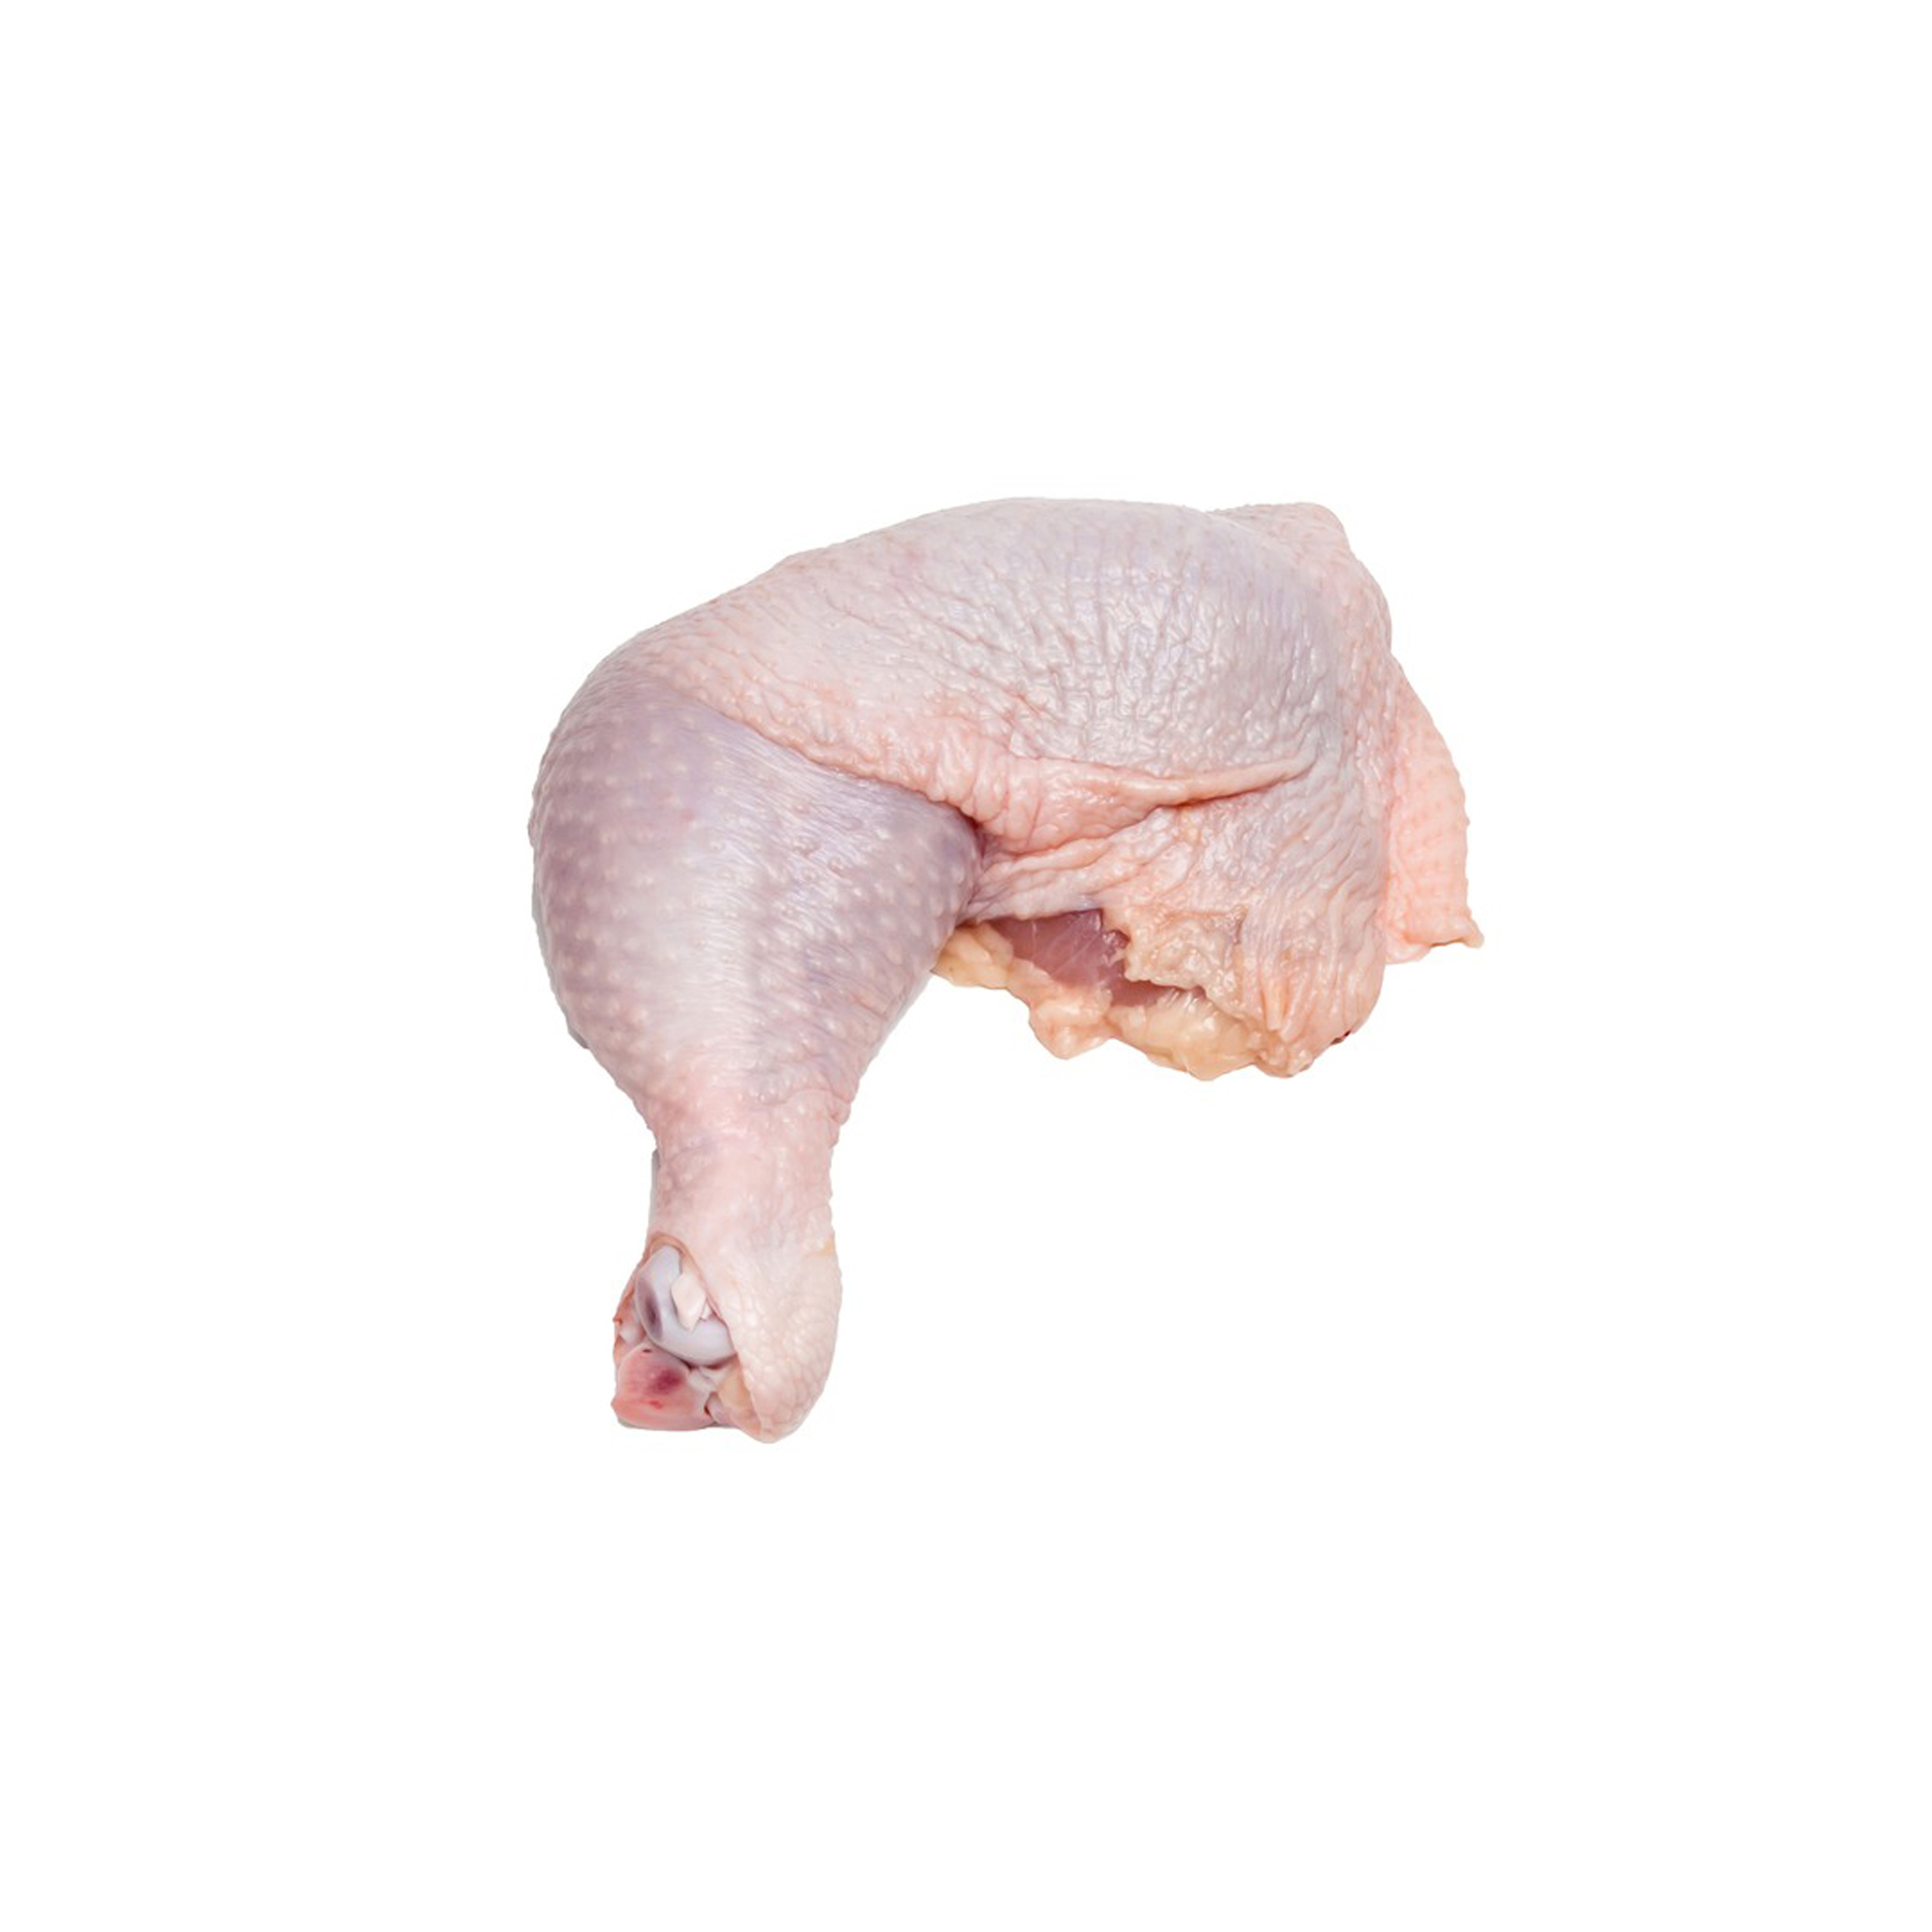 Chicken Legs (Approx. 3-4 Count)